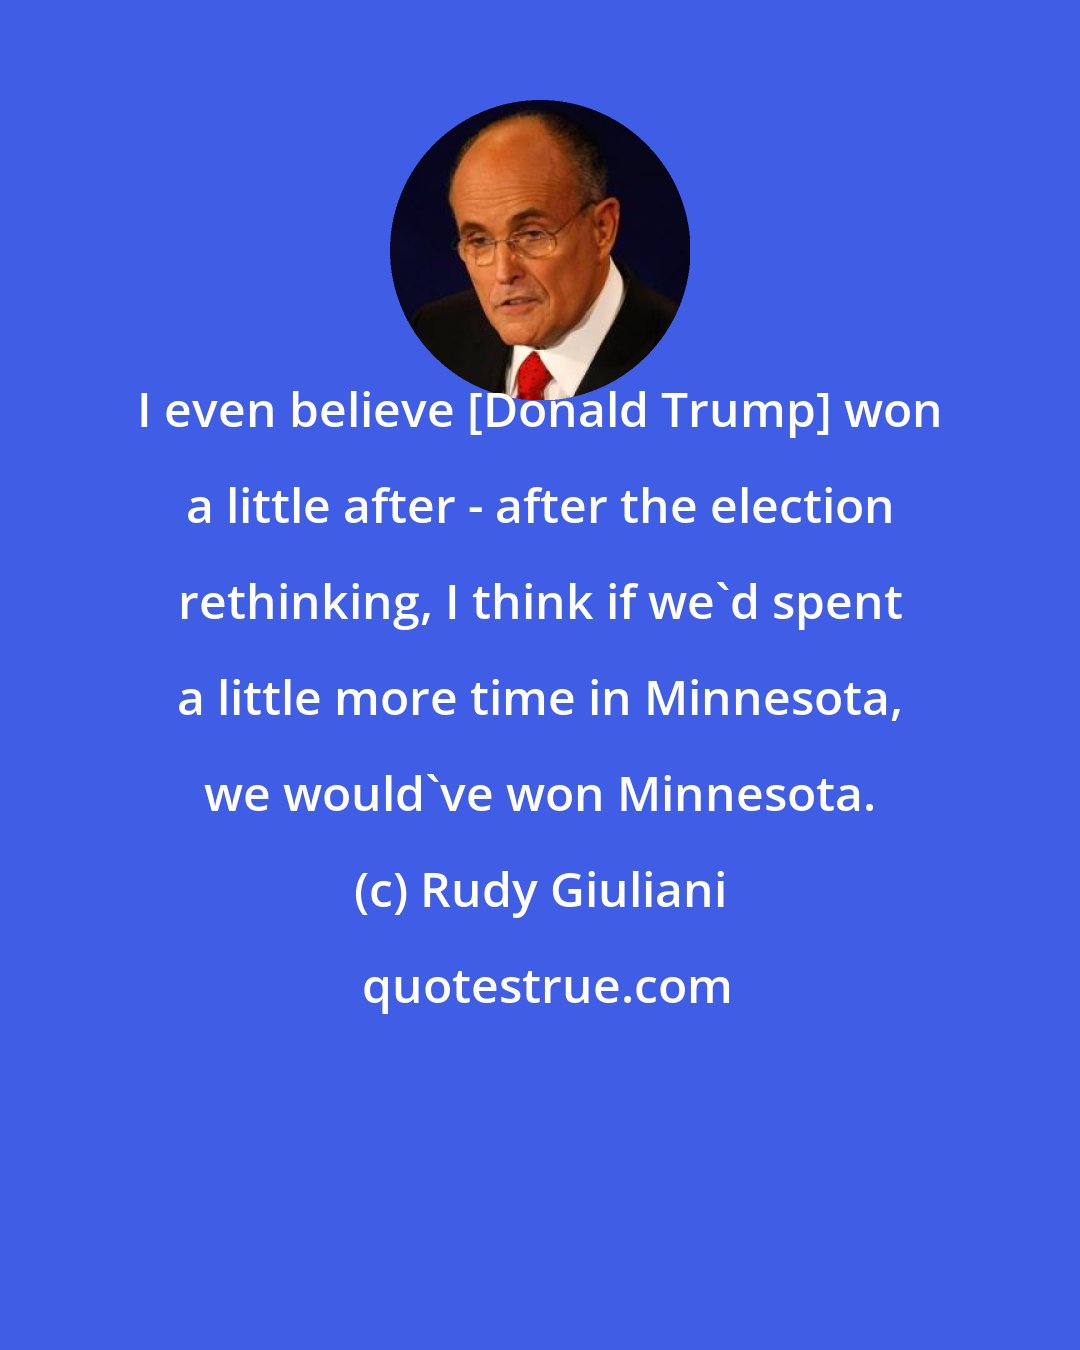 Rudy Giuliani: I even believe [Donald Trump] won a little after - after the election rethinking, I think if we'd spent a little more time in Minnesota, we would've won Minnesota.